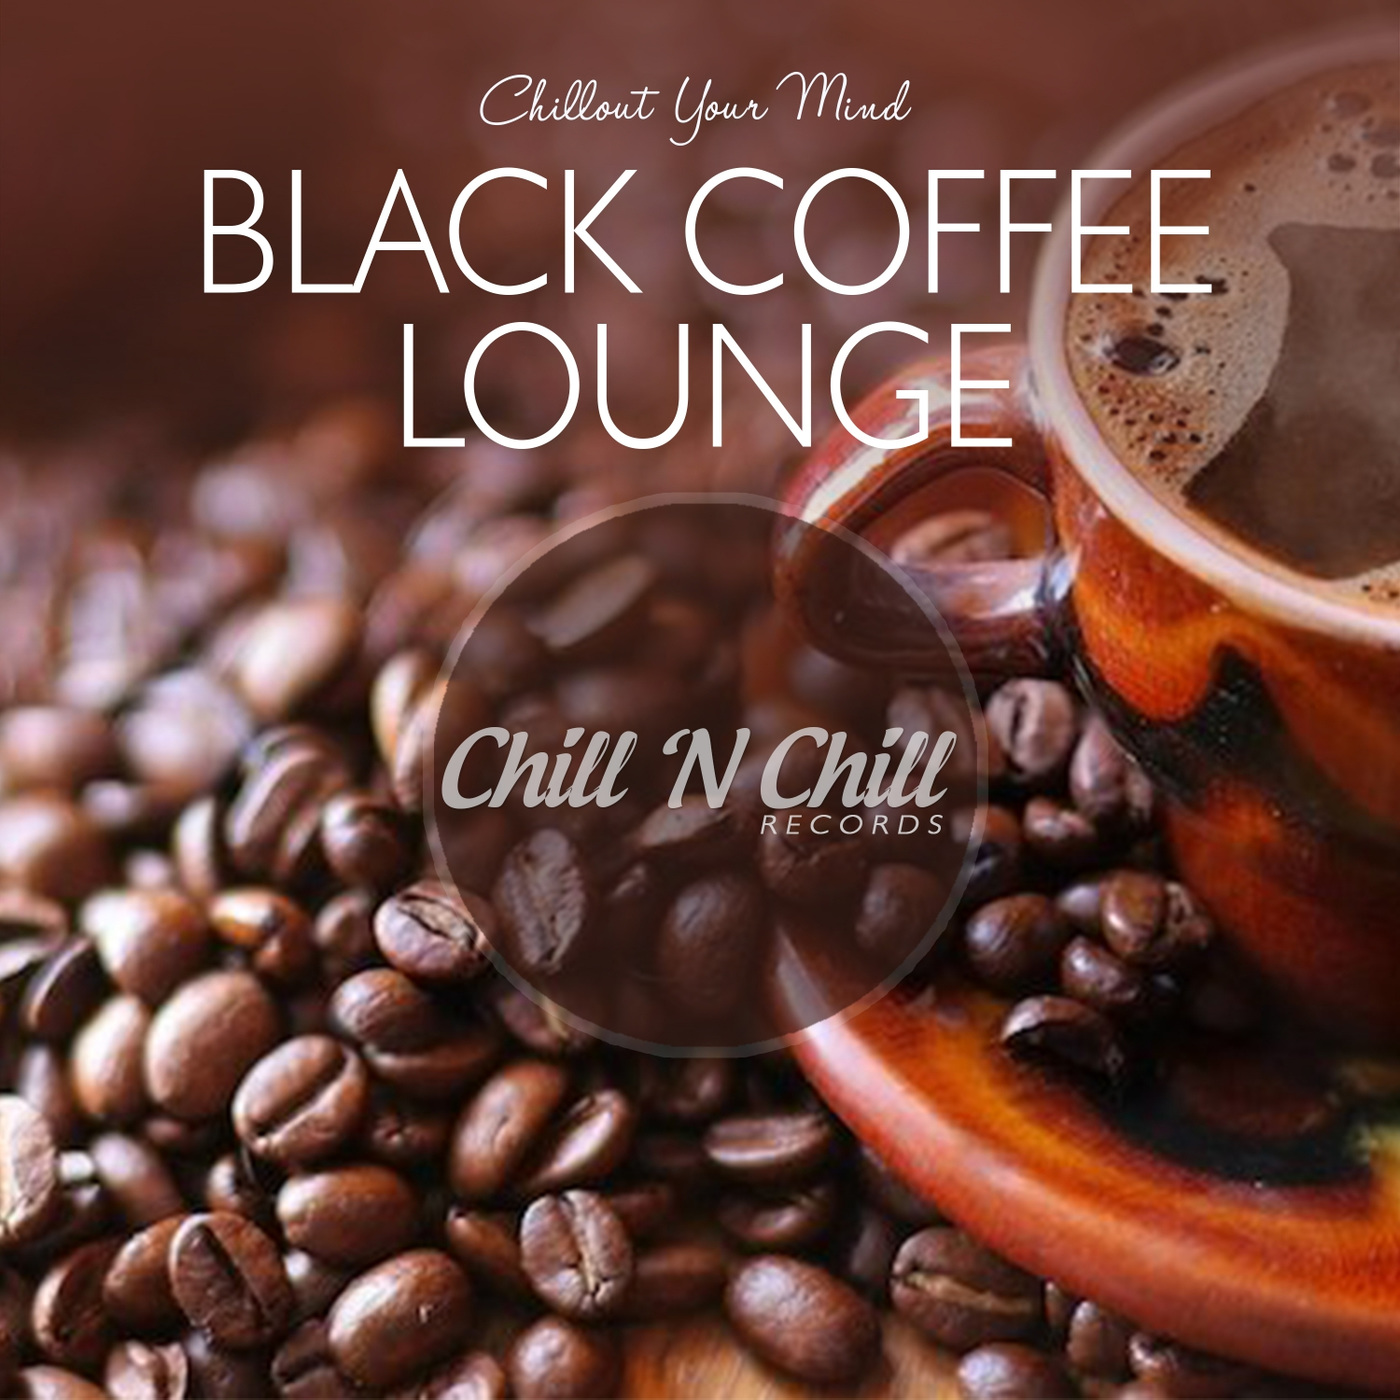 chill n chill records《black coffee lounge：chillout your mind》c